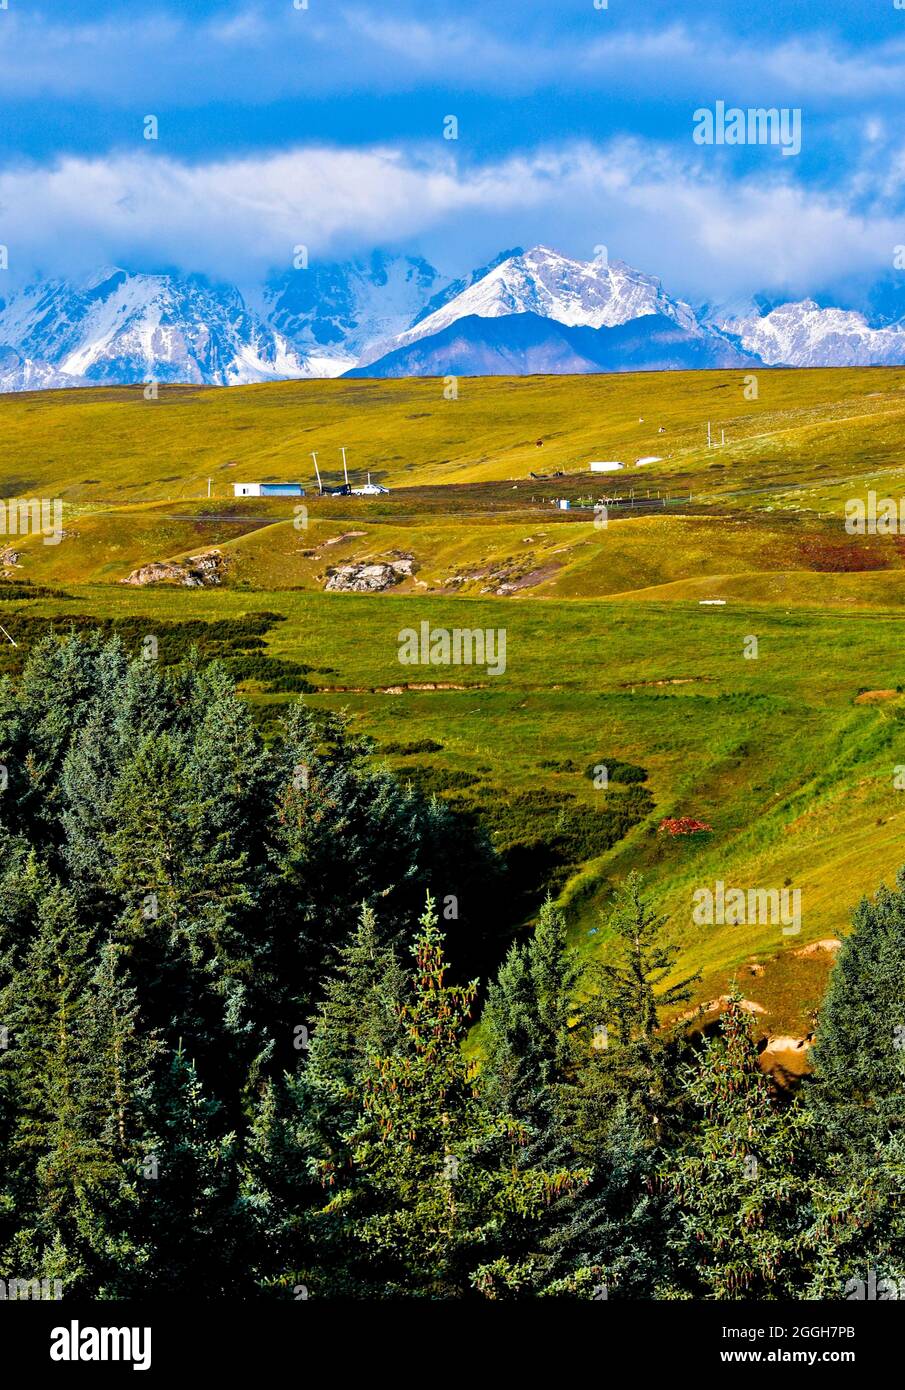 Sunan, Sunan, China. 1st Sep, 2021. On August 31, 2021, the beautiful scenery of Kangle Grassland in Sunan Yugu Autonomous County, Zhangye City, Gansu Province, under the Qilian Mountains. In early autumn, the Kangle Grassland in Sunan Yugu Autonomous County, Zhangye City, Gansu Province, located at the northern foot of the Qilian Mountains. The snow-capped mountains and snow scenes complement each other, the meadows and trees are soaked by the autumn wind. Colored clothes, the colorful autumn colors outlined by the autumn grassland under the rising sun after the rain, are like oil p Stock Photo